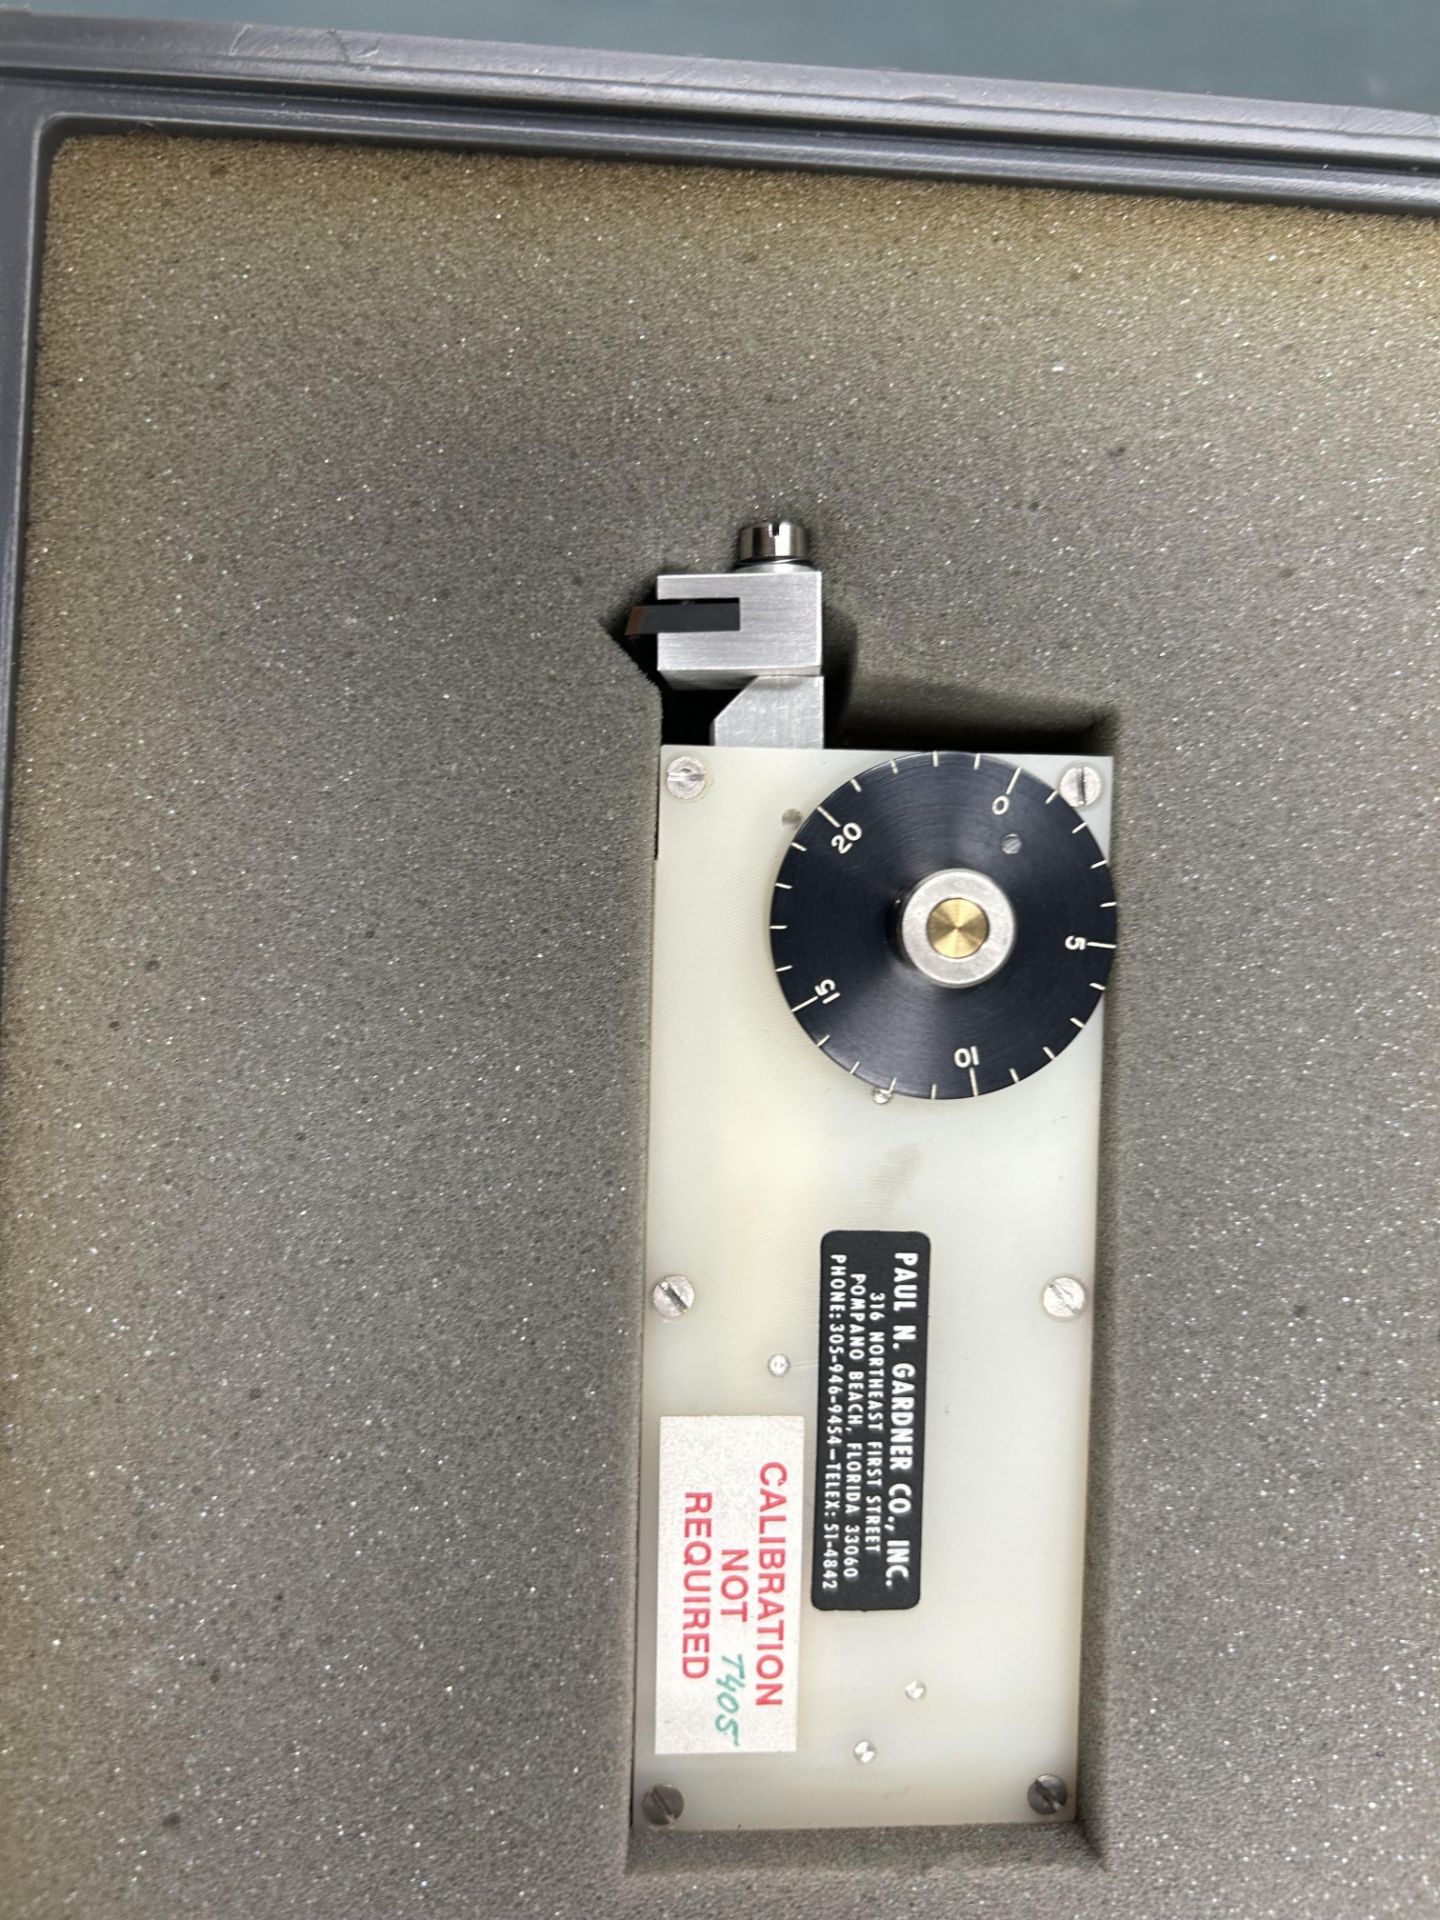 GARDCO mod. PA-5050 Scratch Adhesion Mar Tester (S.A.M Tester) w/case - Image 3 of 4